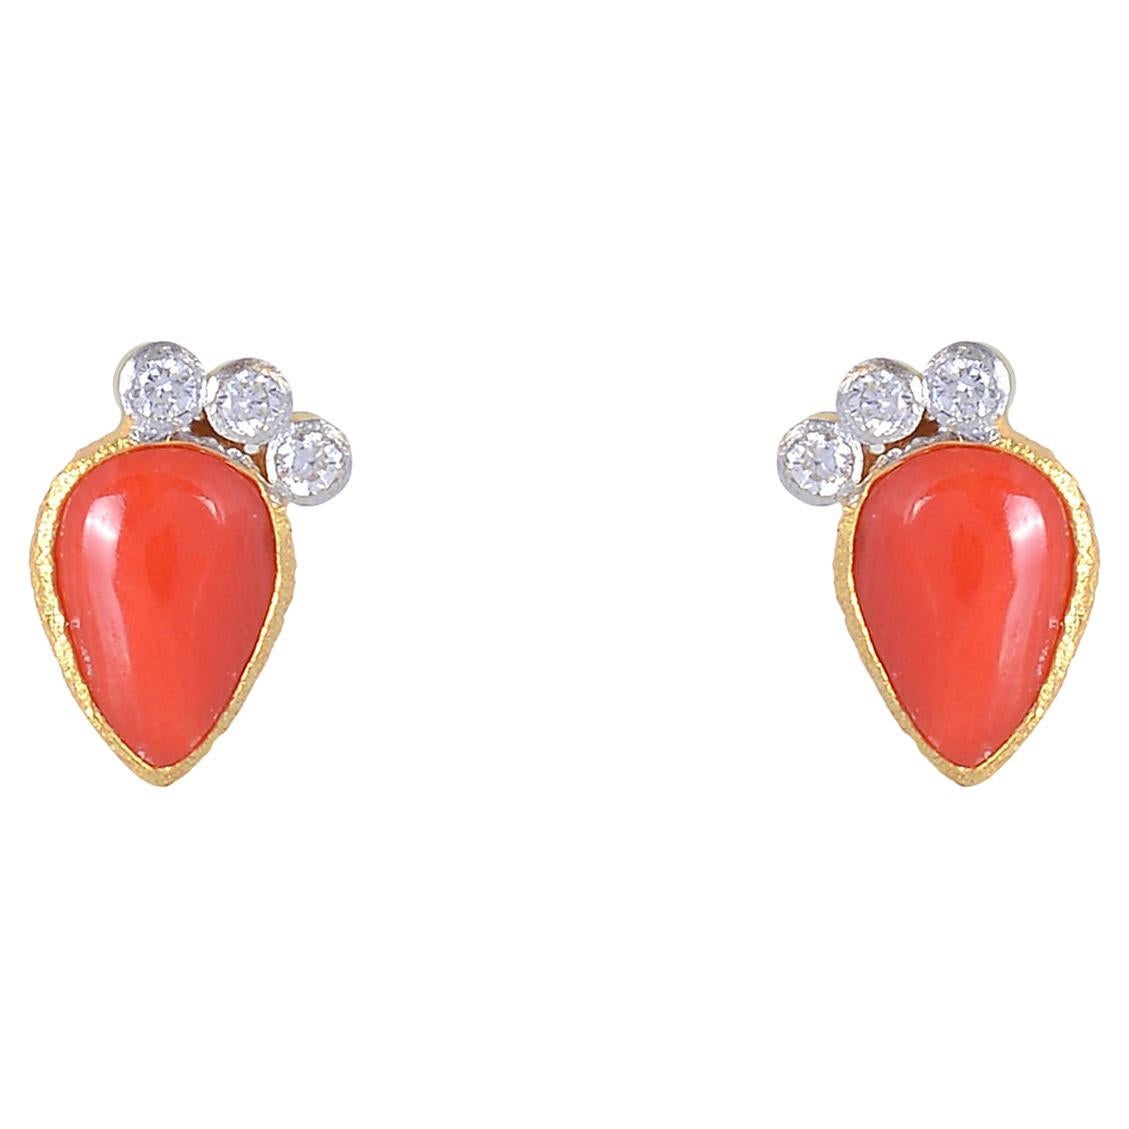 18k gold 0.10cts Diamond with 1.07cts Coral Earring 